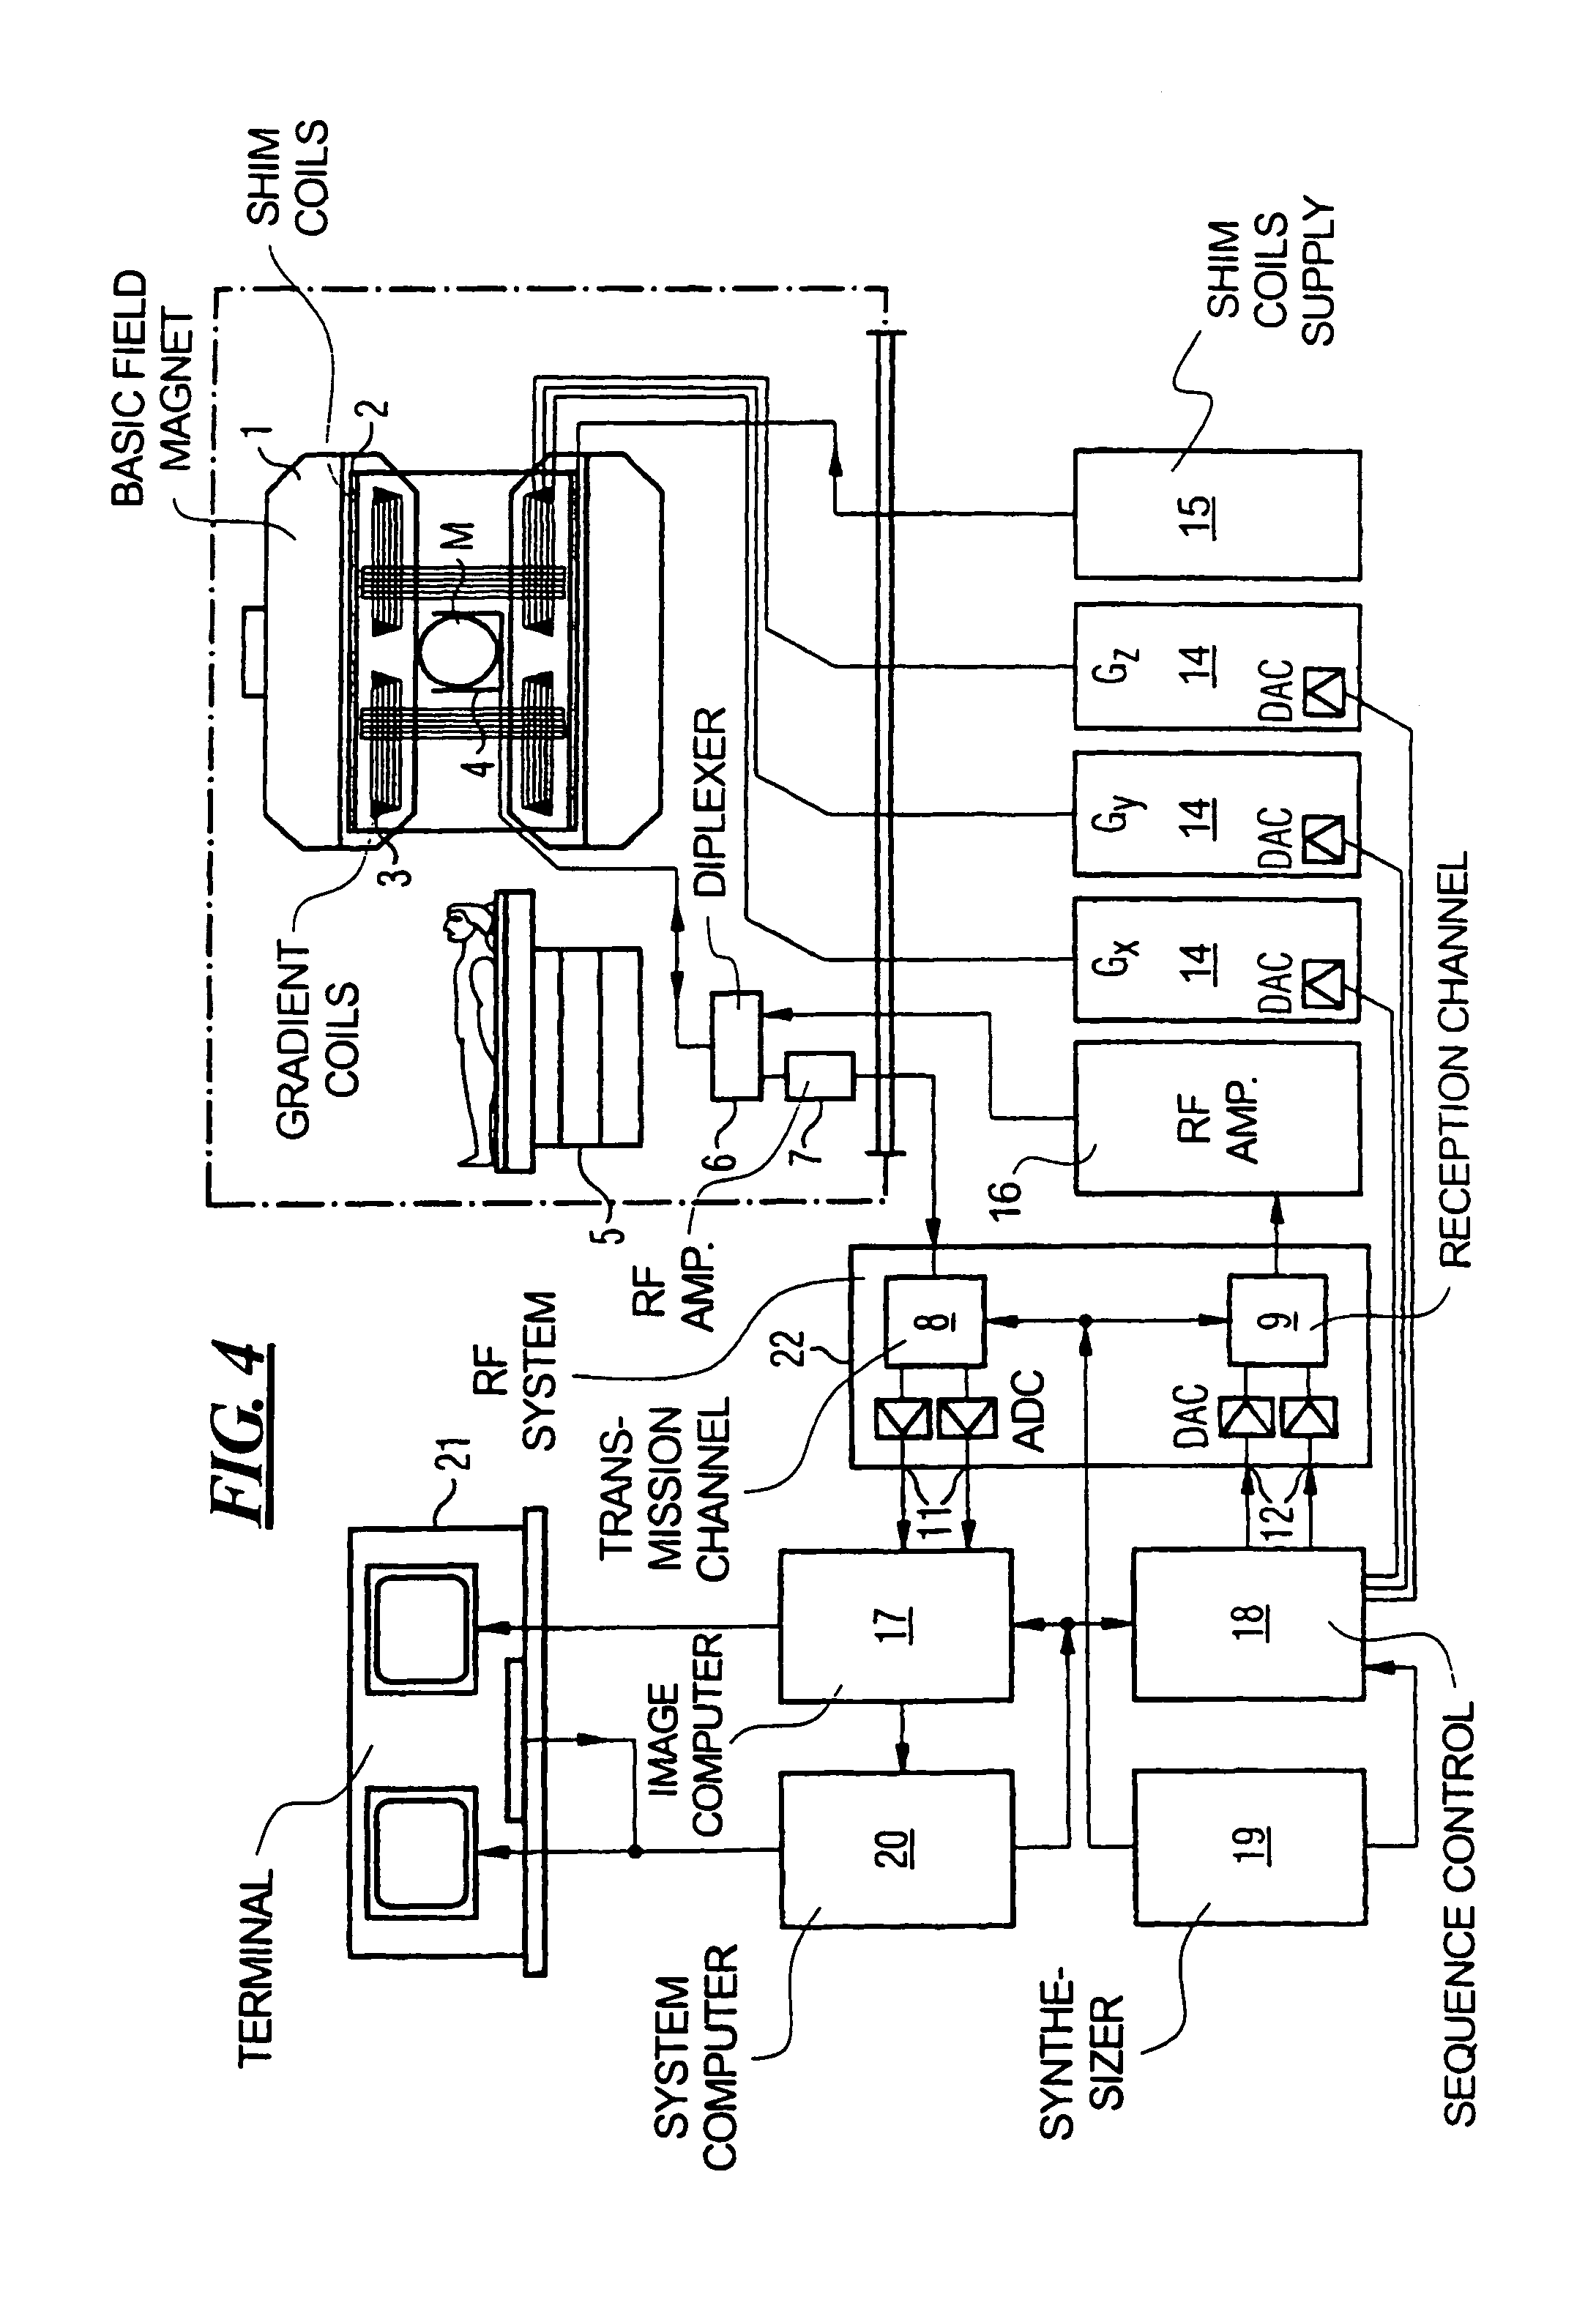 MRI method and apparatus for faster data acquisition or better motion artifact reduction